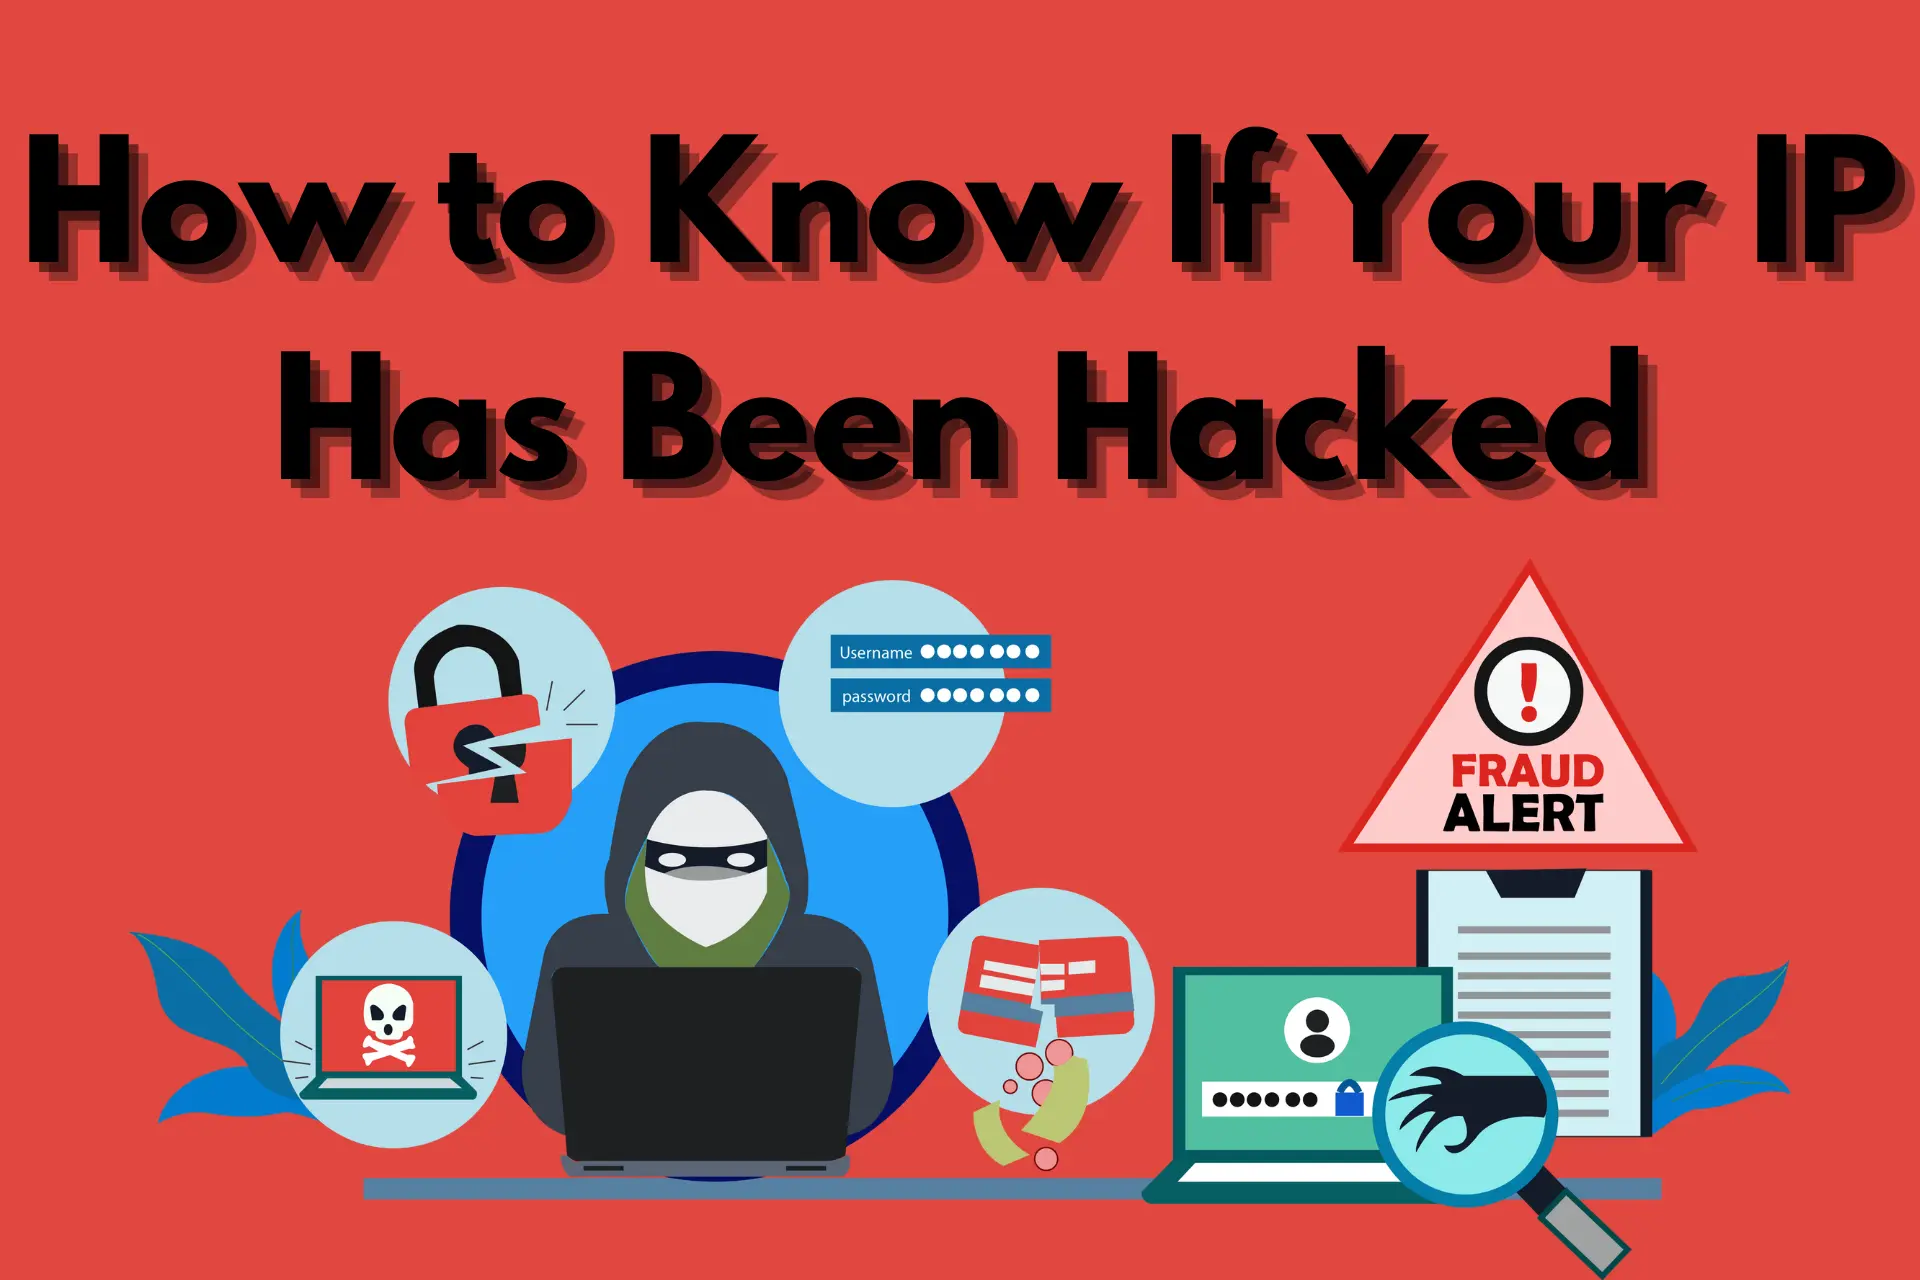 How to know if your IP has been hacked